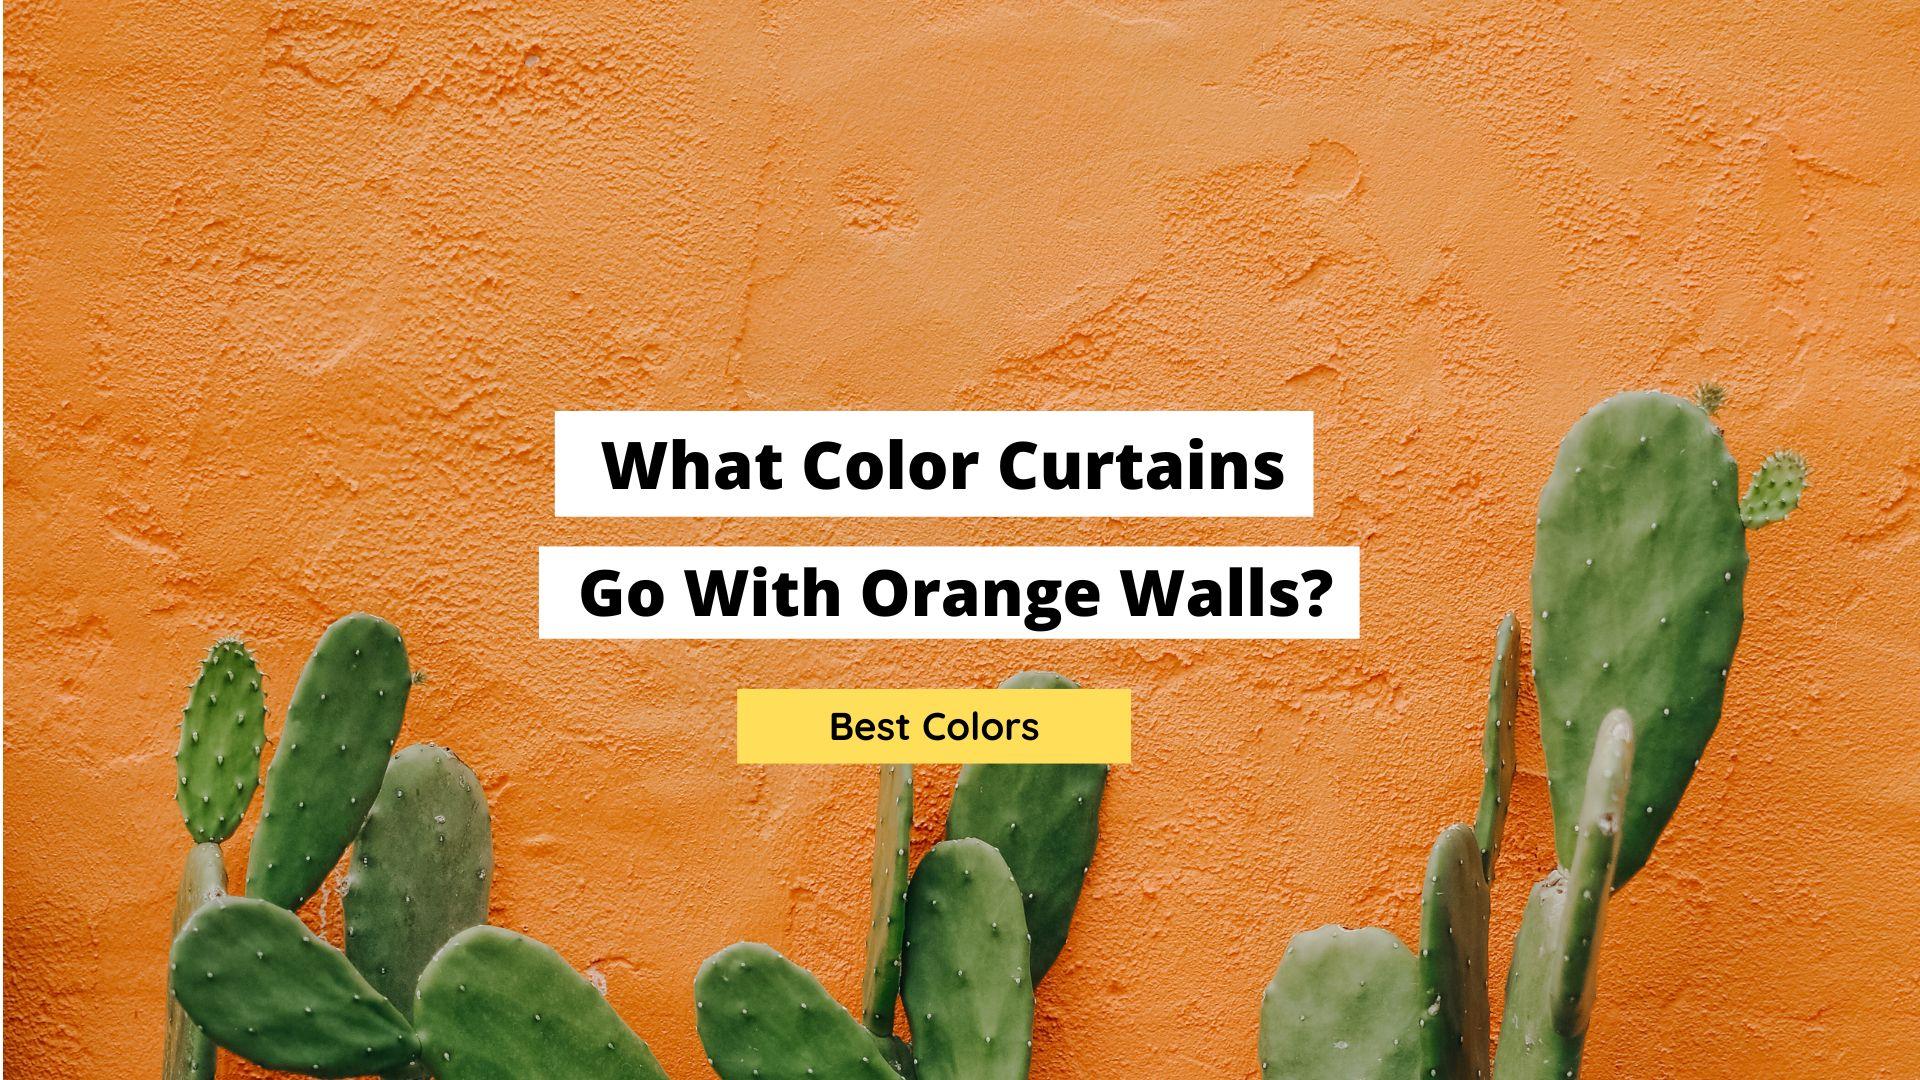 What Color Curtains Go With Orange Walls